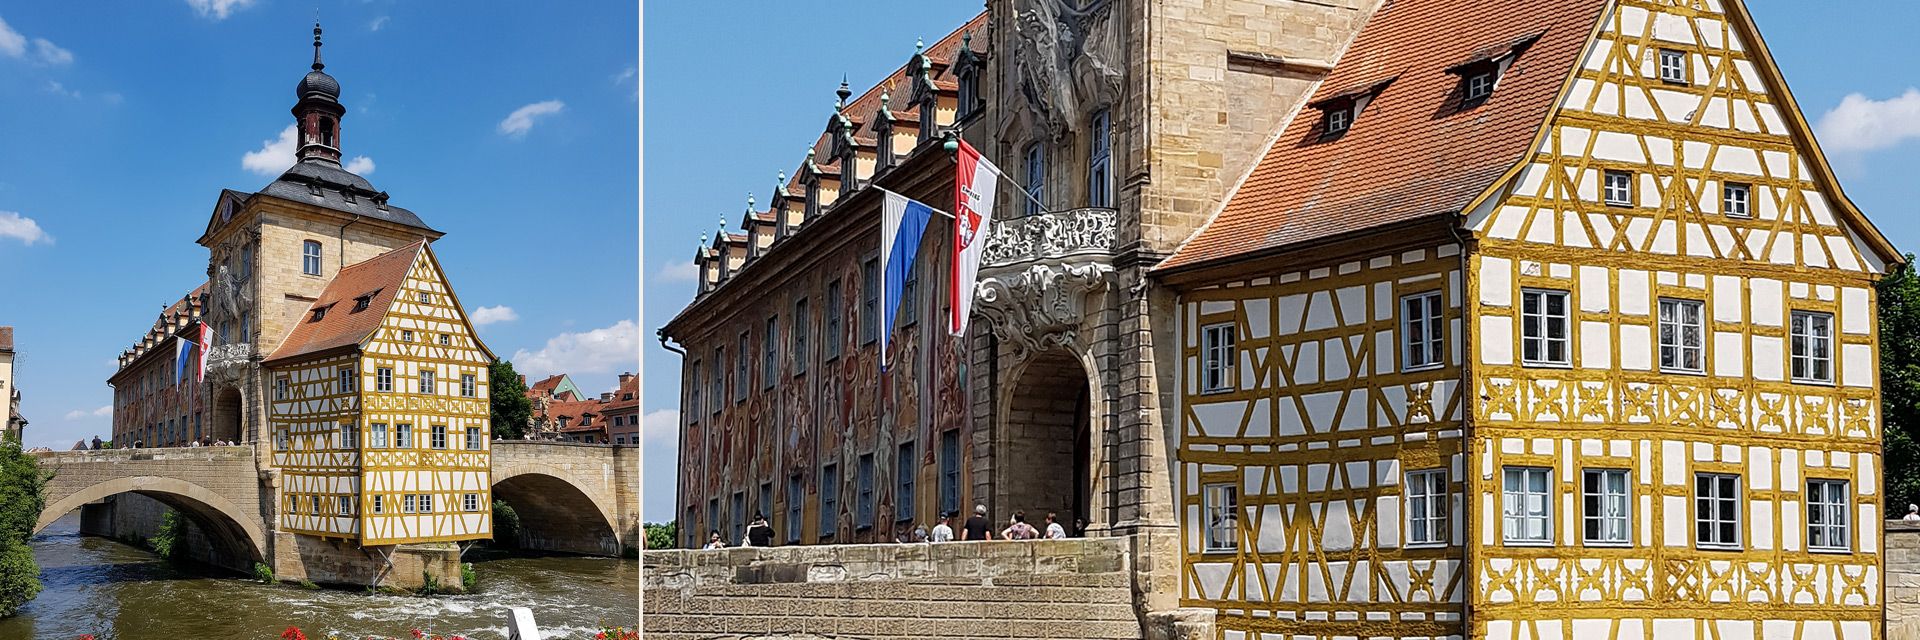 Collage des alten Rathauses in Bamberg